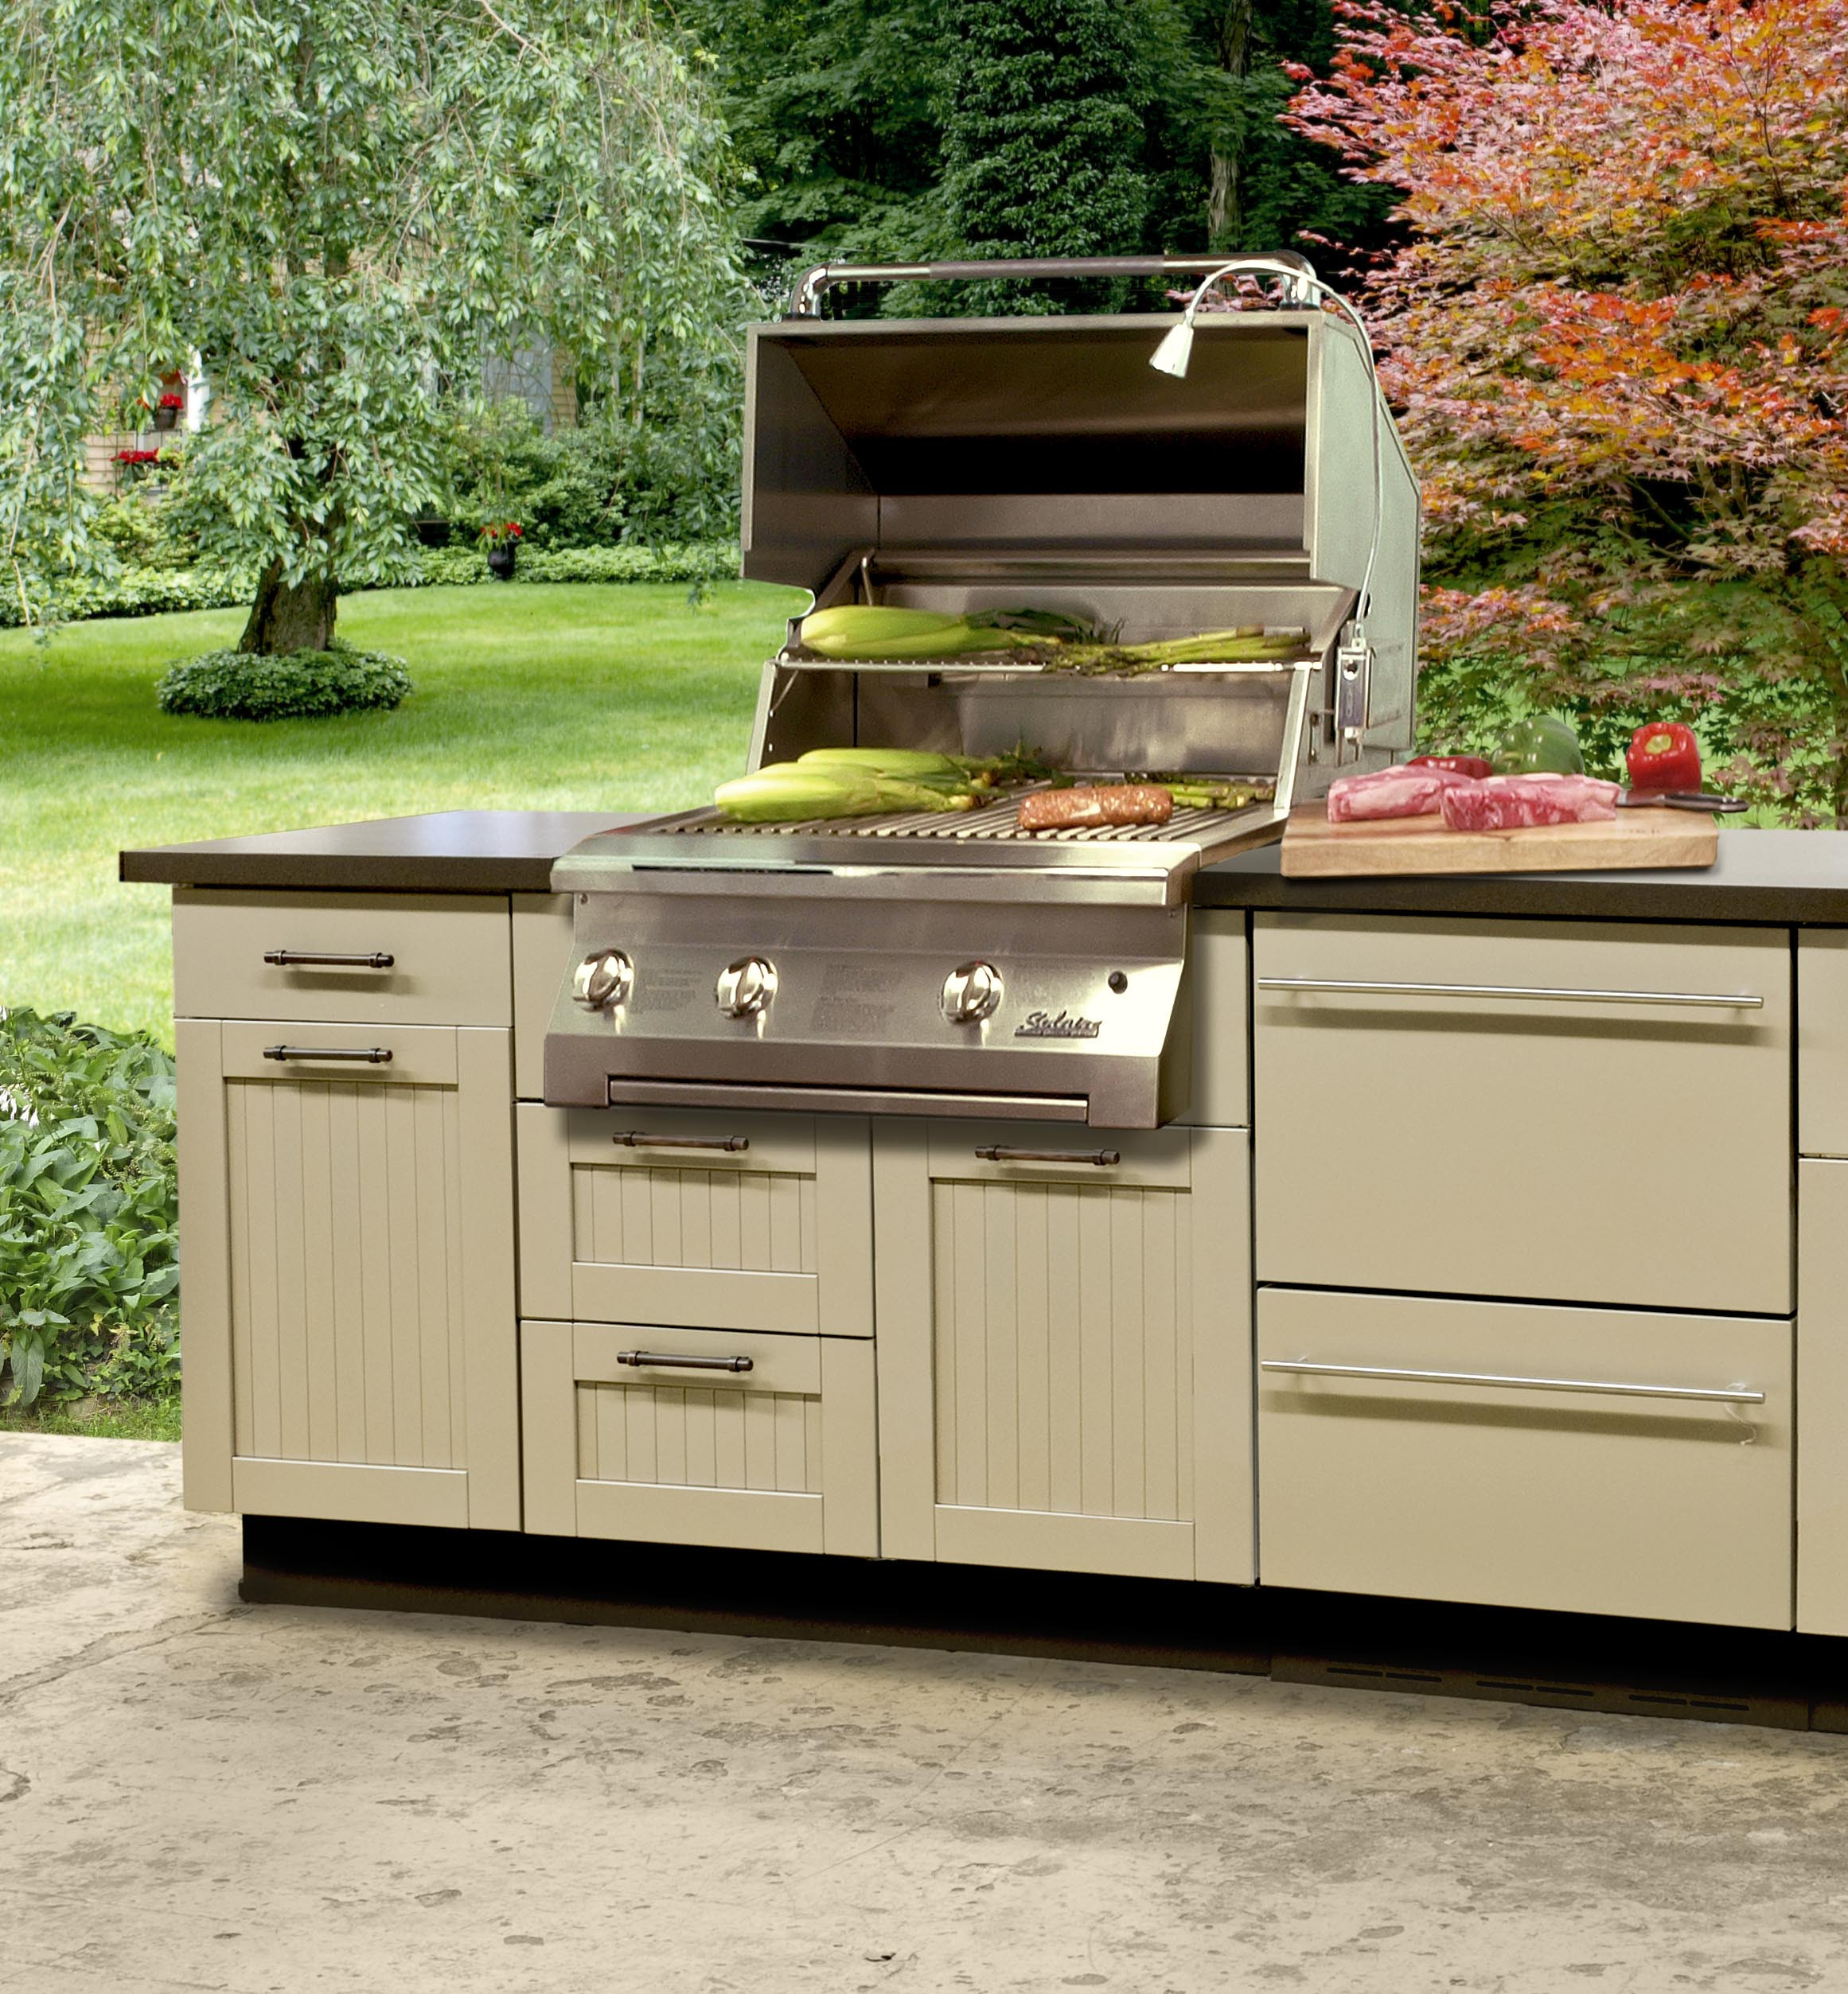 Stainless Steel Outdoor Kitchen Cabinets
 Danver Stainless Steel Cabinetry